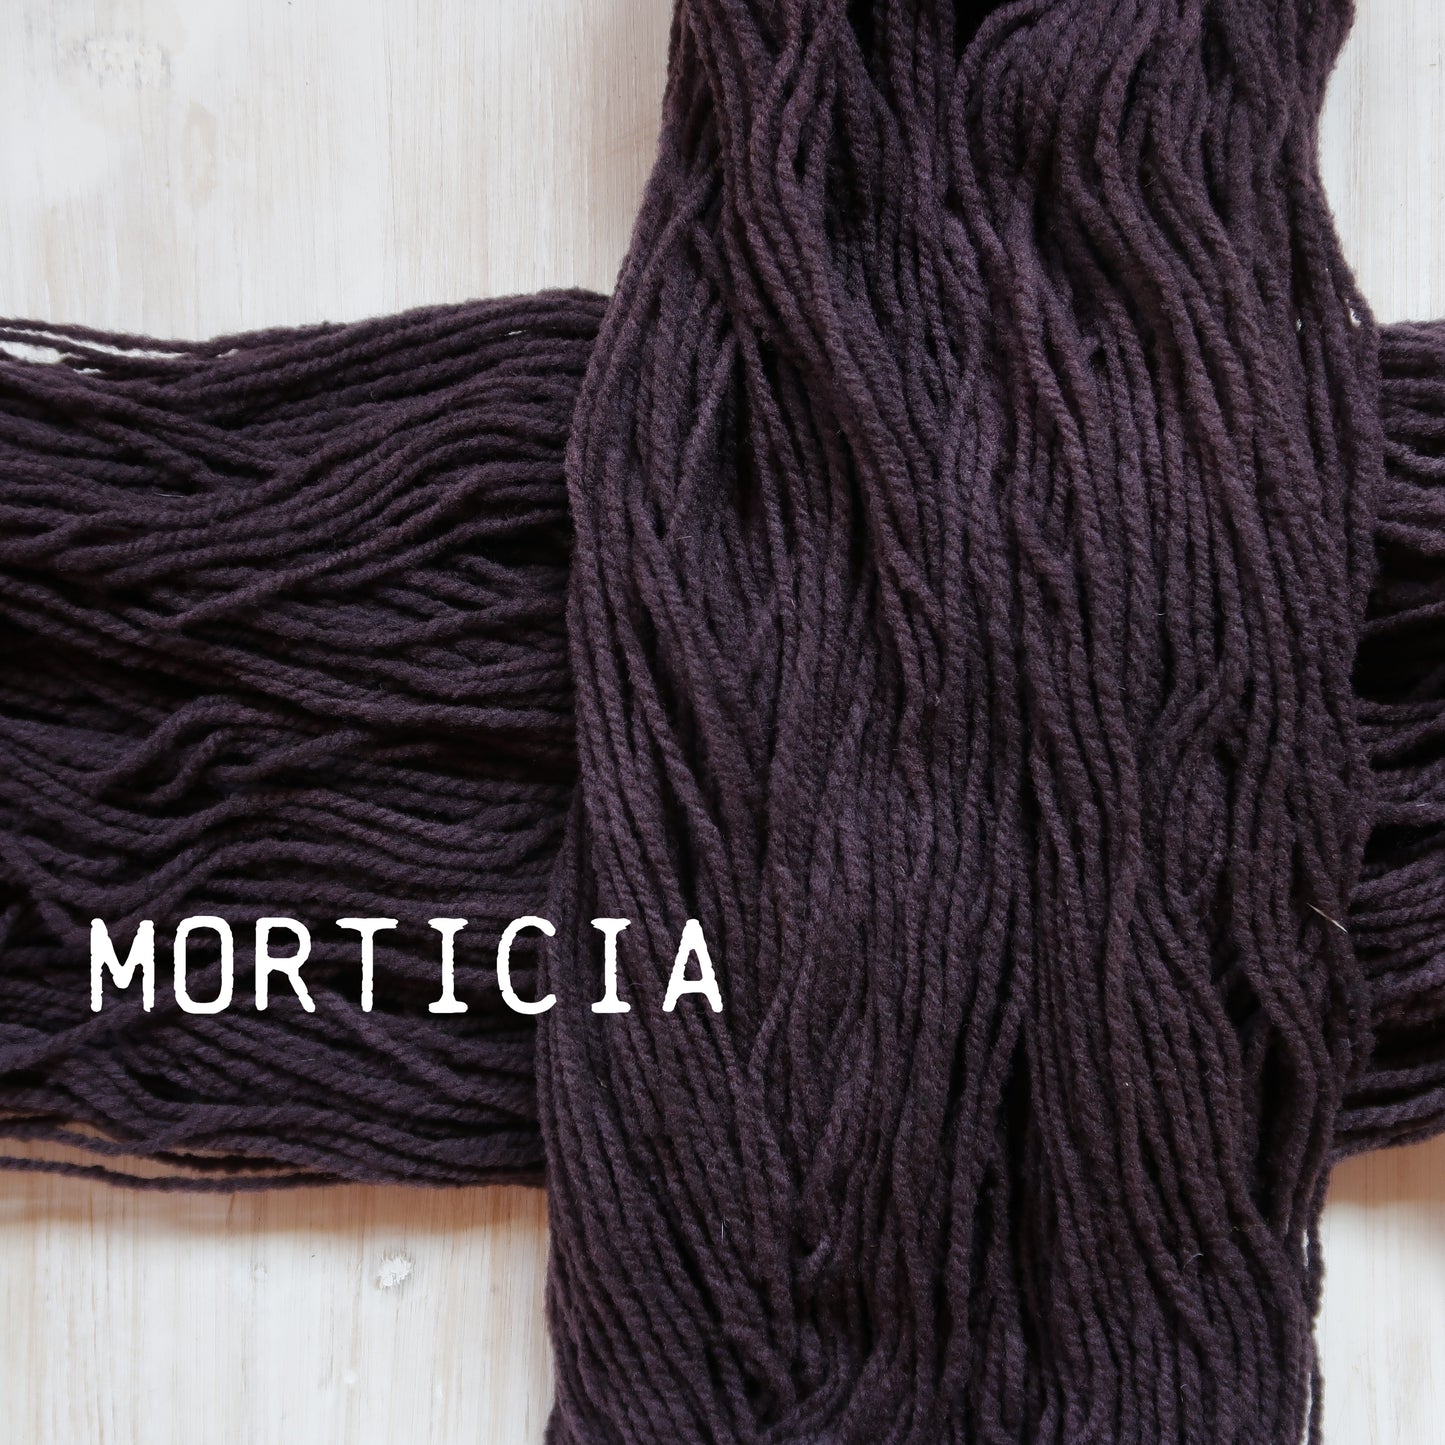 MORTICIA - FORAGE WORSTED